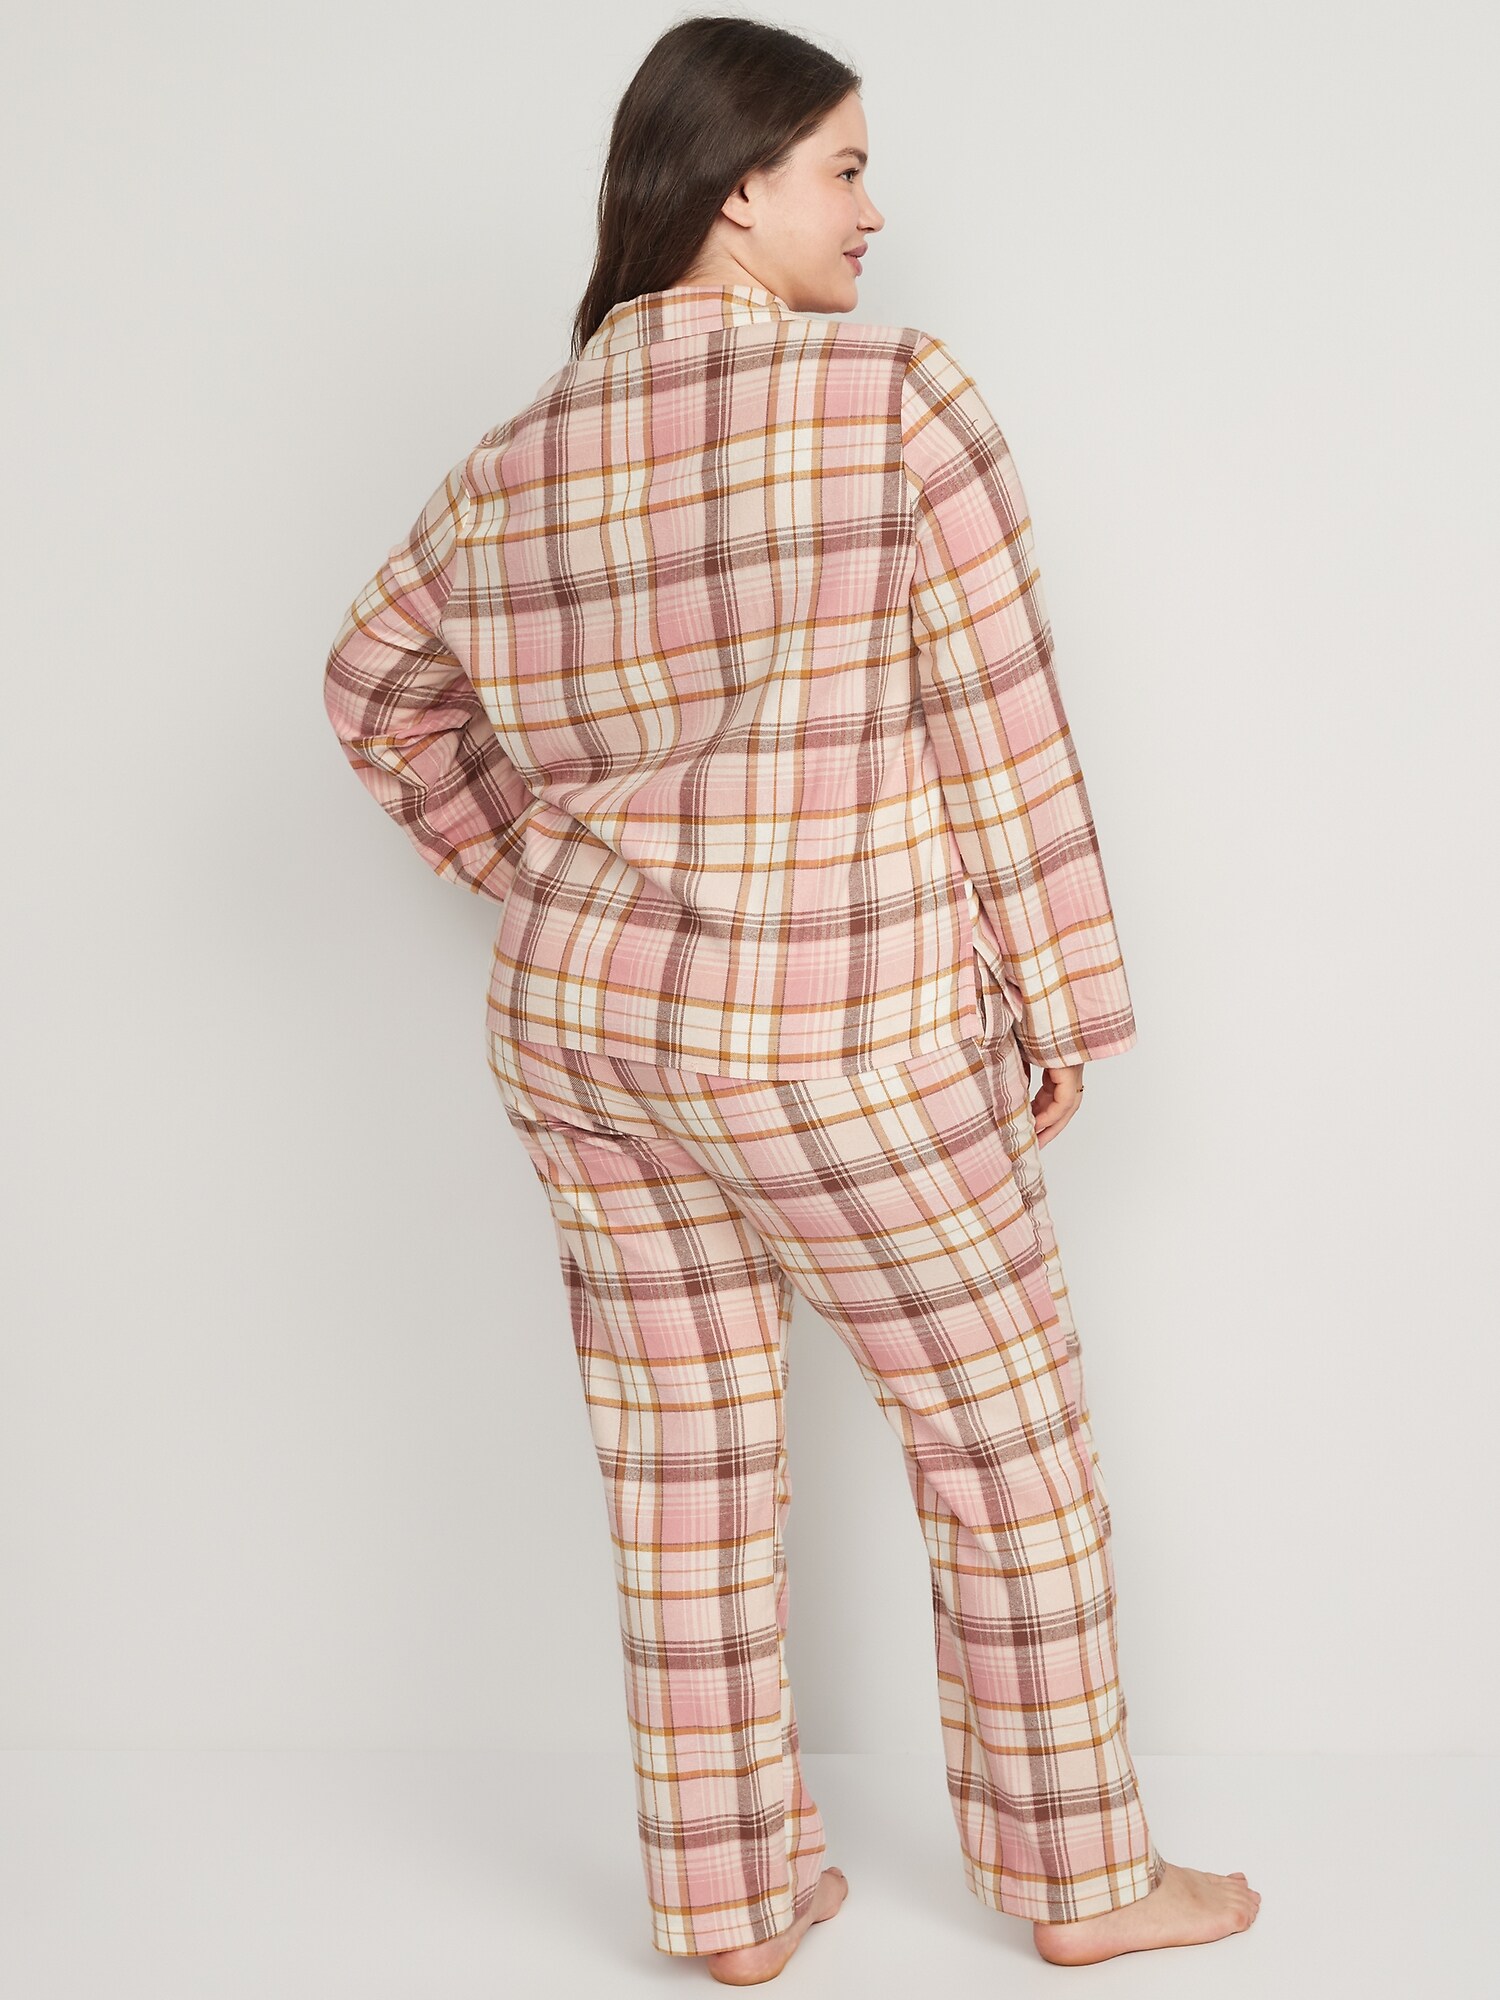 Printed Flannel Pajama Set for Women, Old Navy